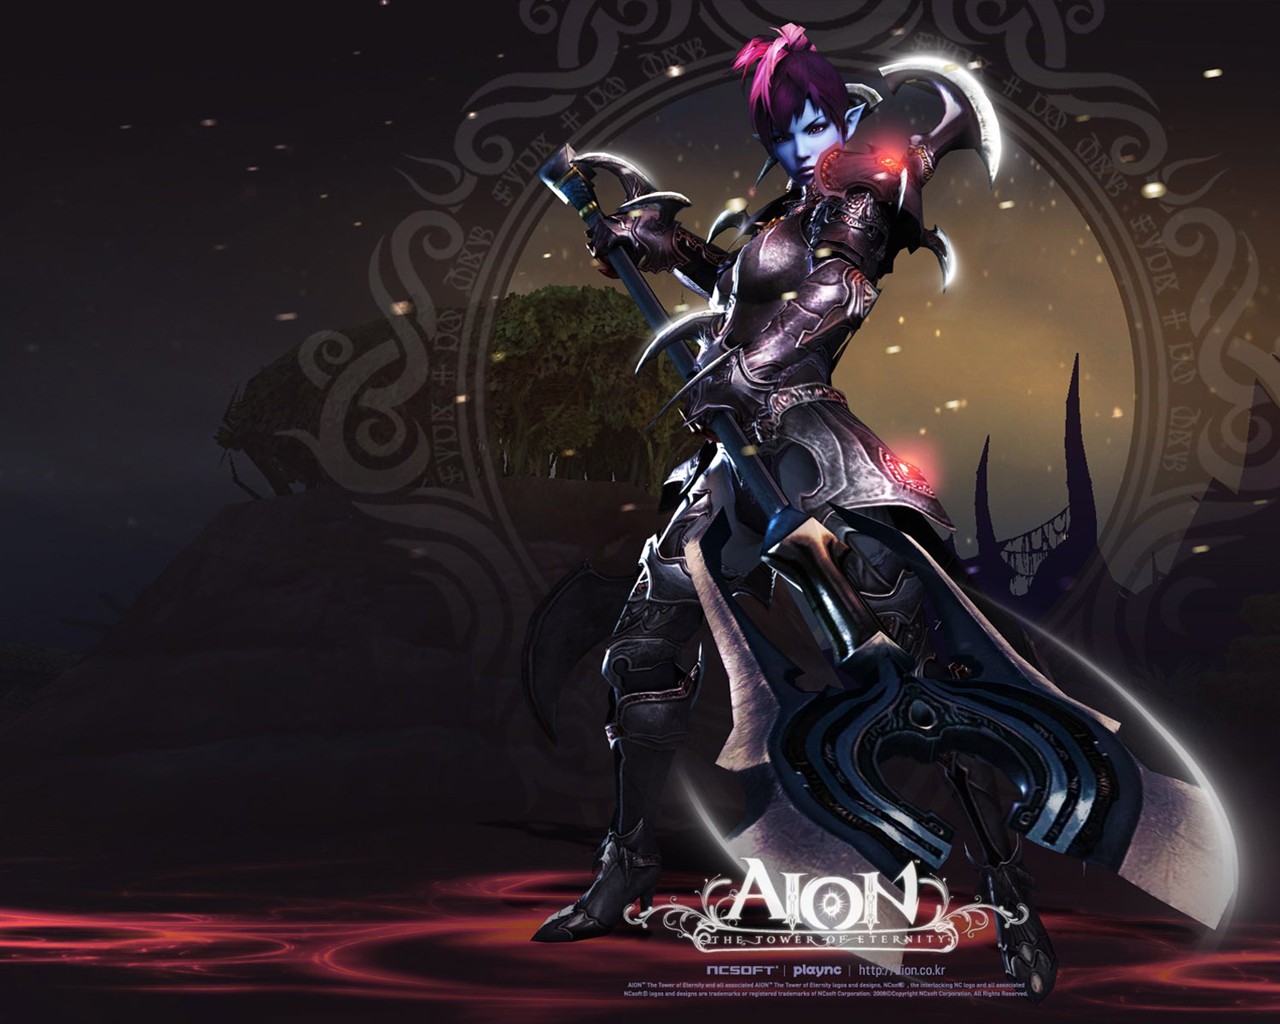 Aion modeling HD gaming wallpapers #5 - 1280x1024